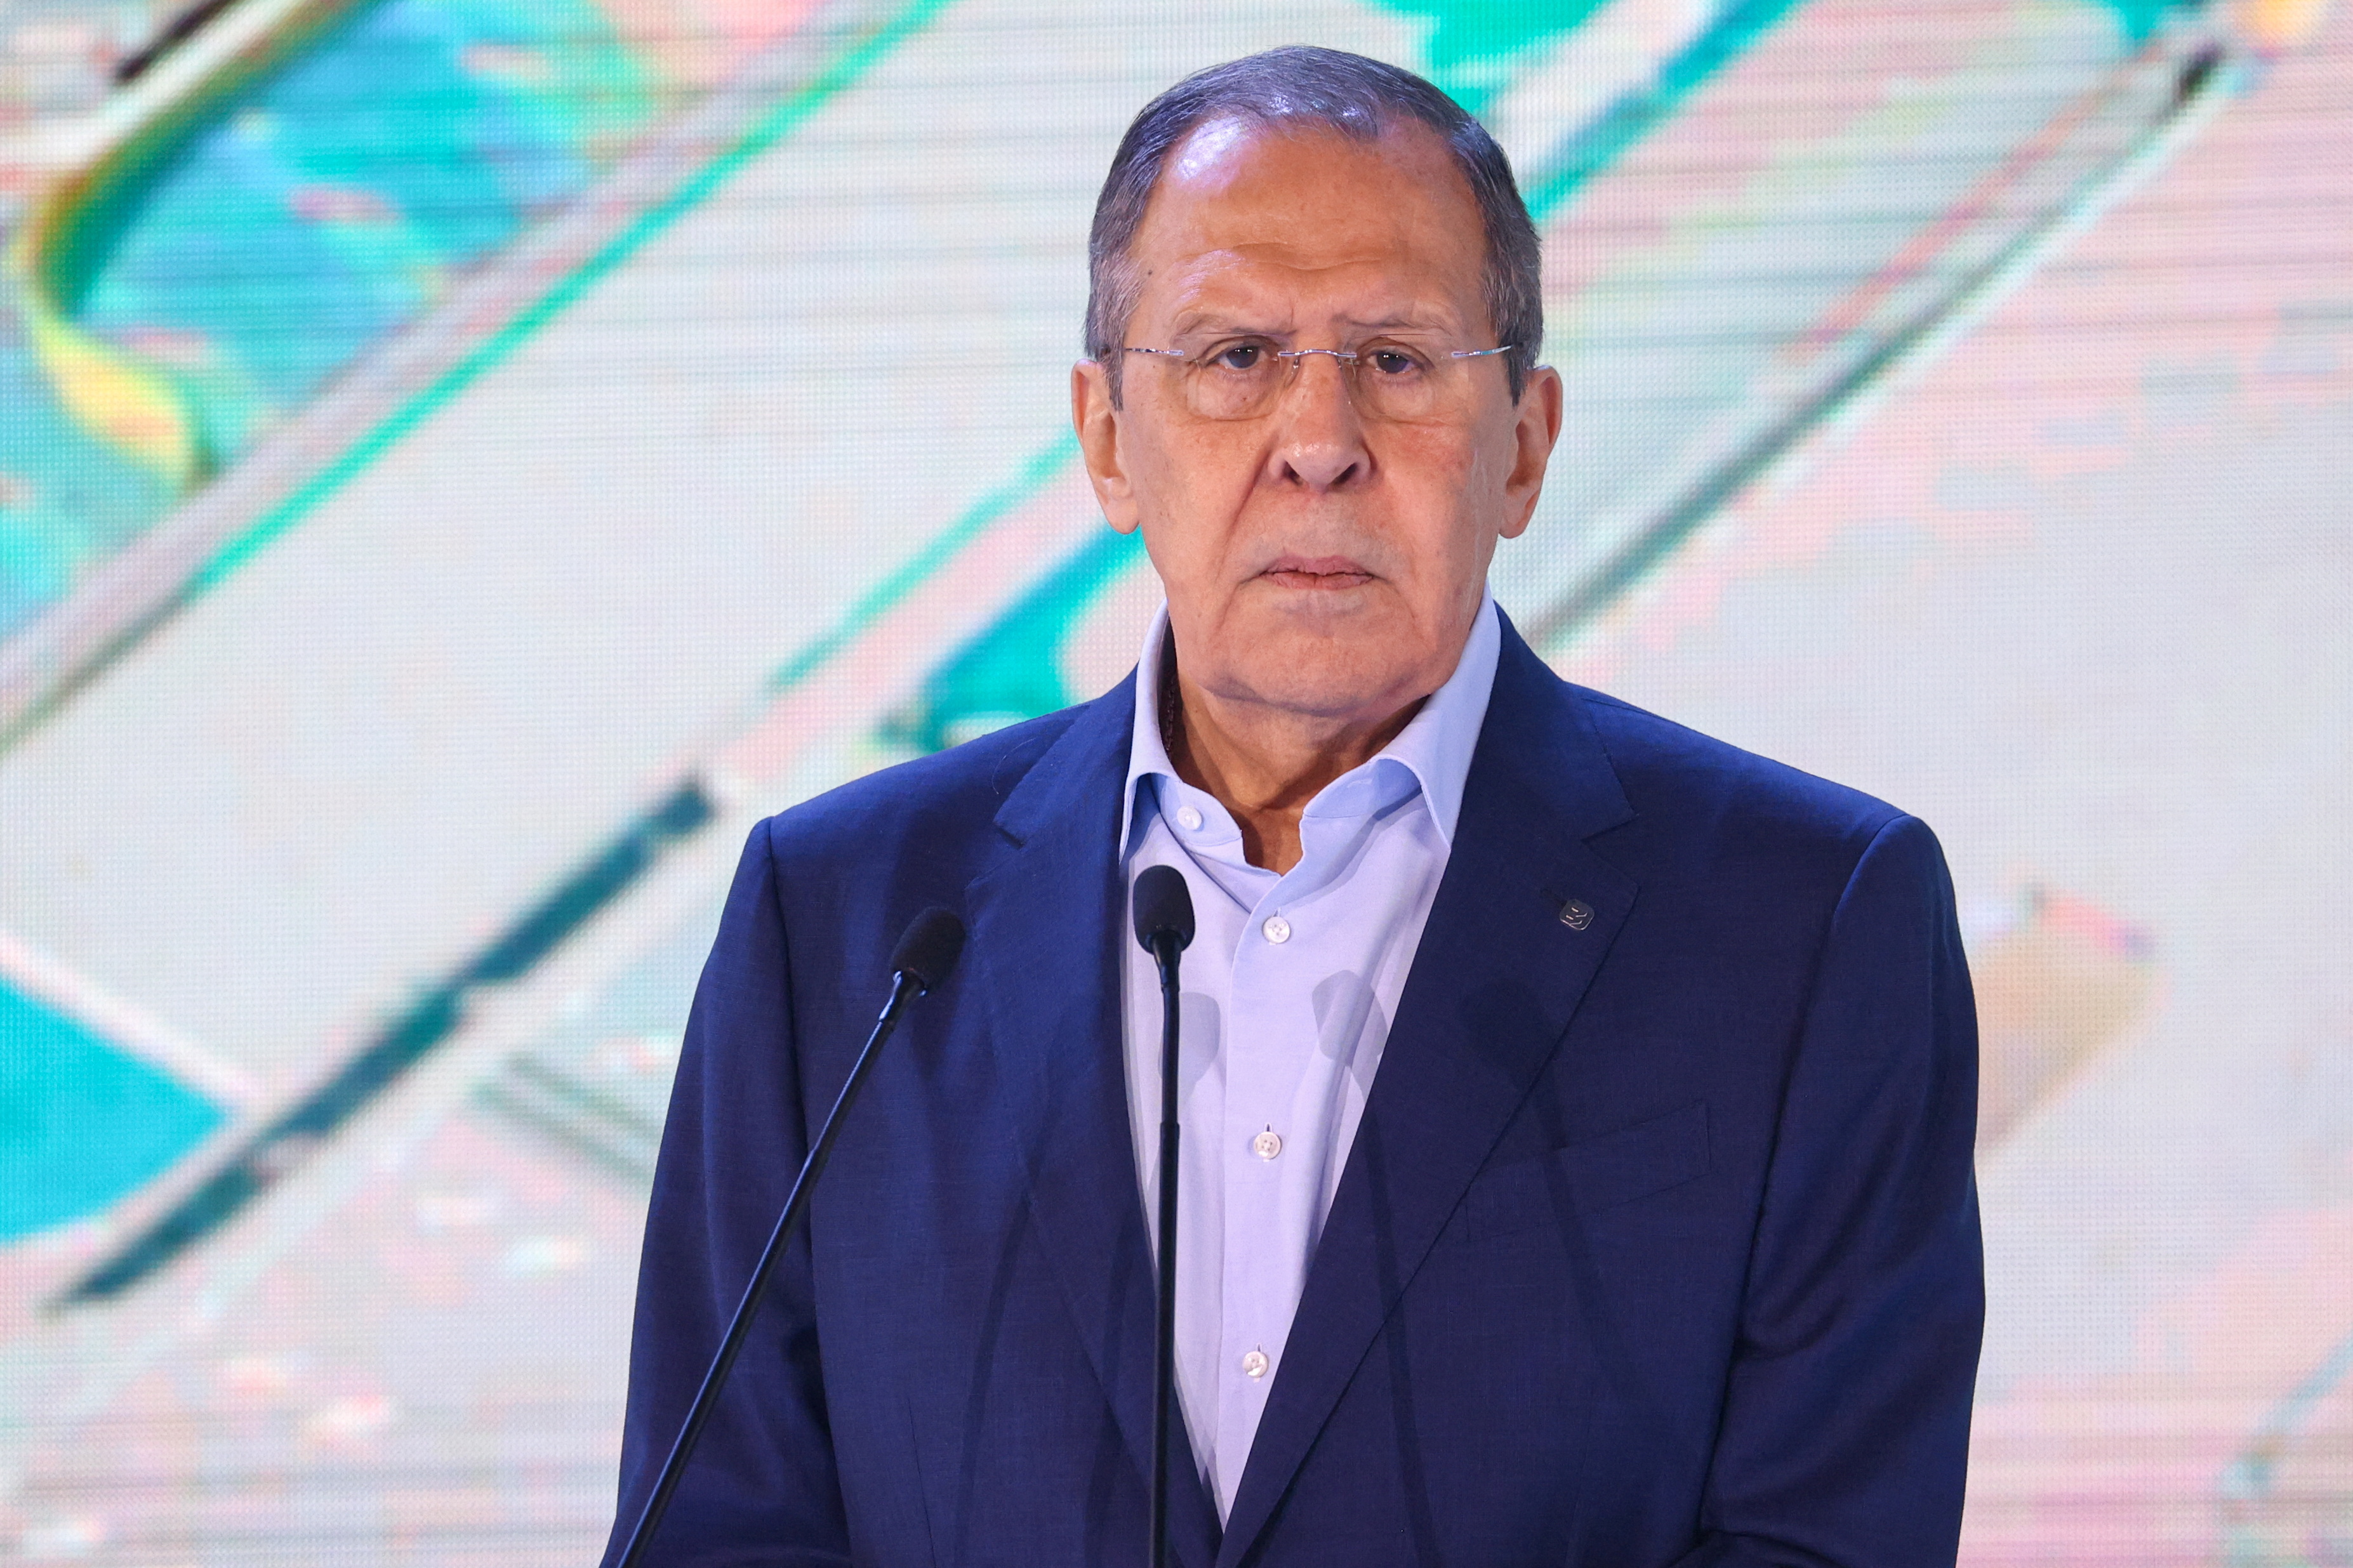 Russian Foreign Minister Sergei Lavrov delivers a speech at a Russian society Znanie (Knowledge) event in Moscow